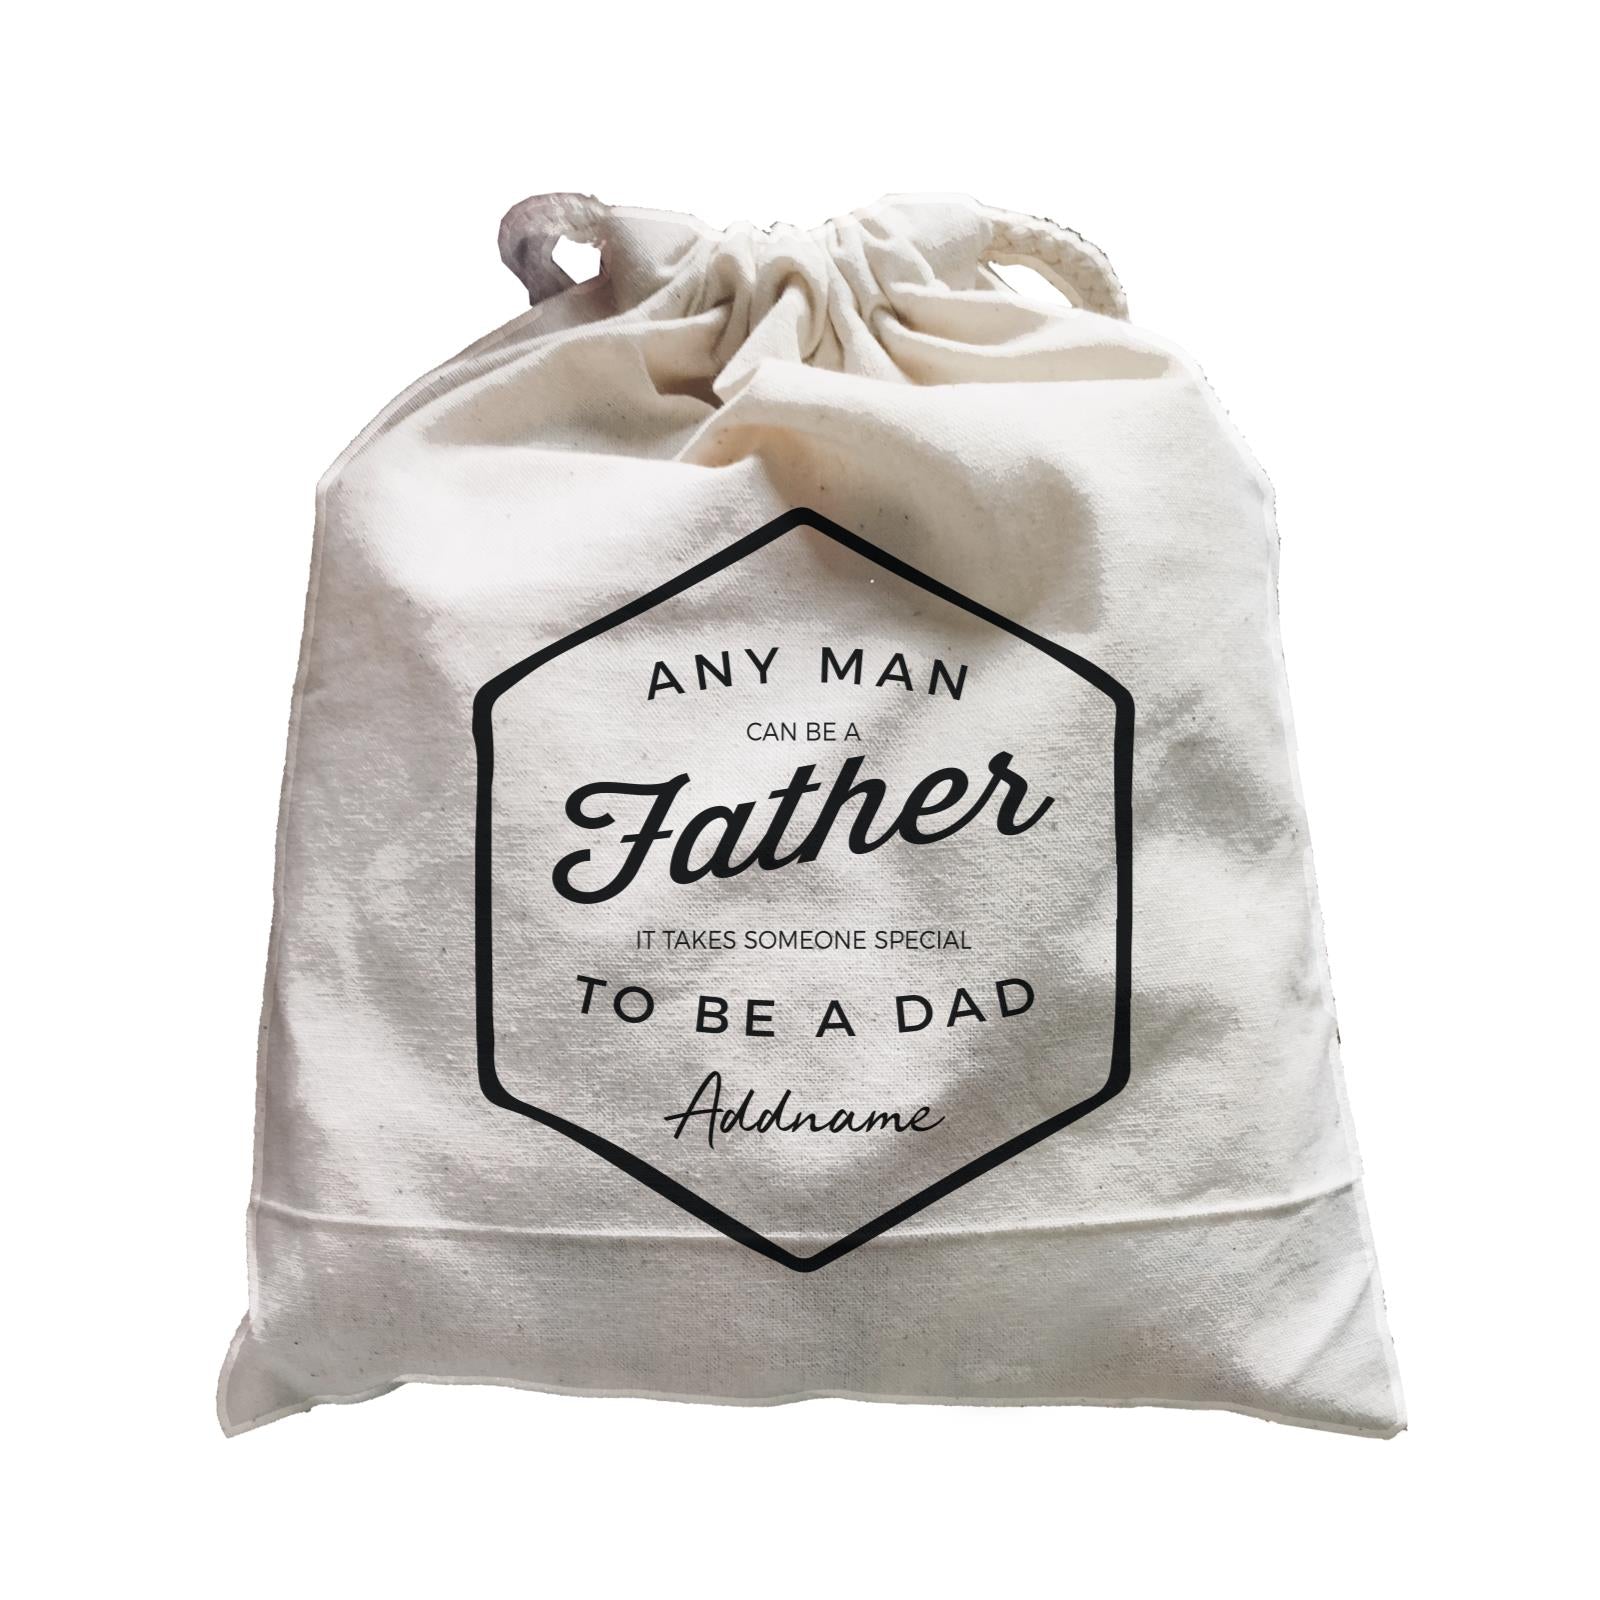 Dad Badge Any Man Can Be A Father Addname Satchel